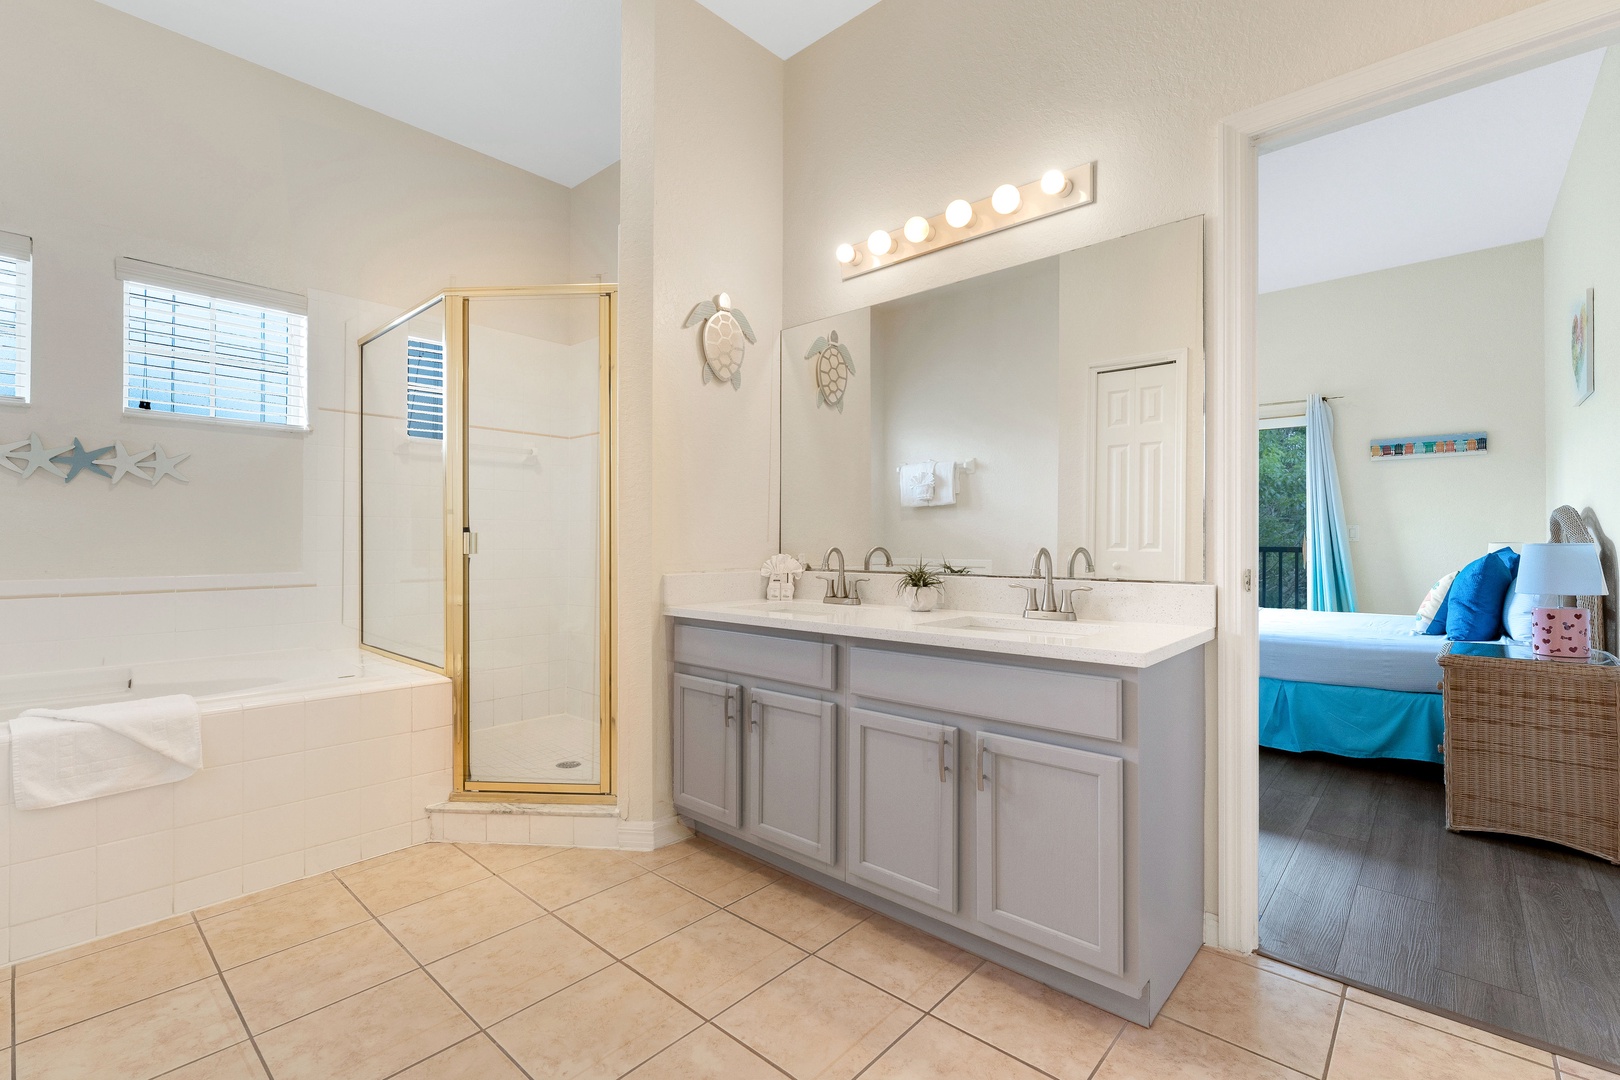 This ensuite with double vanity, shower, & tub also attaches to the hall